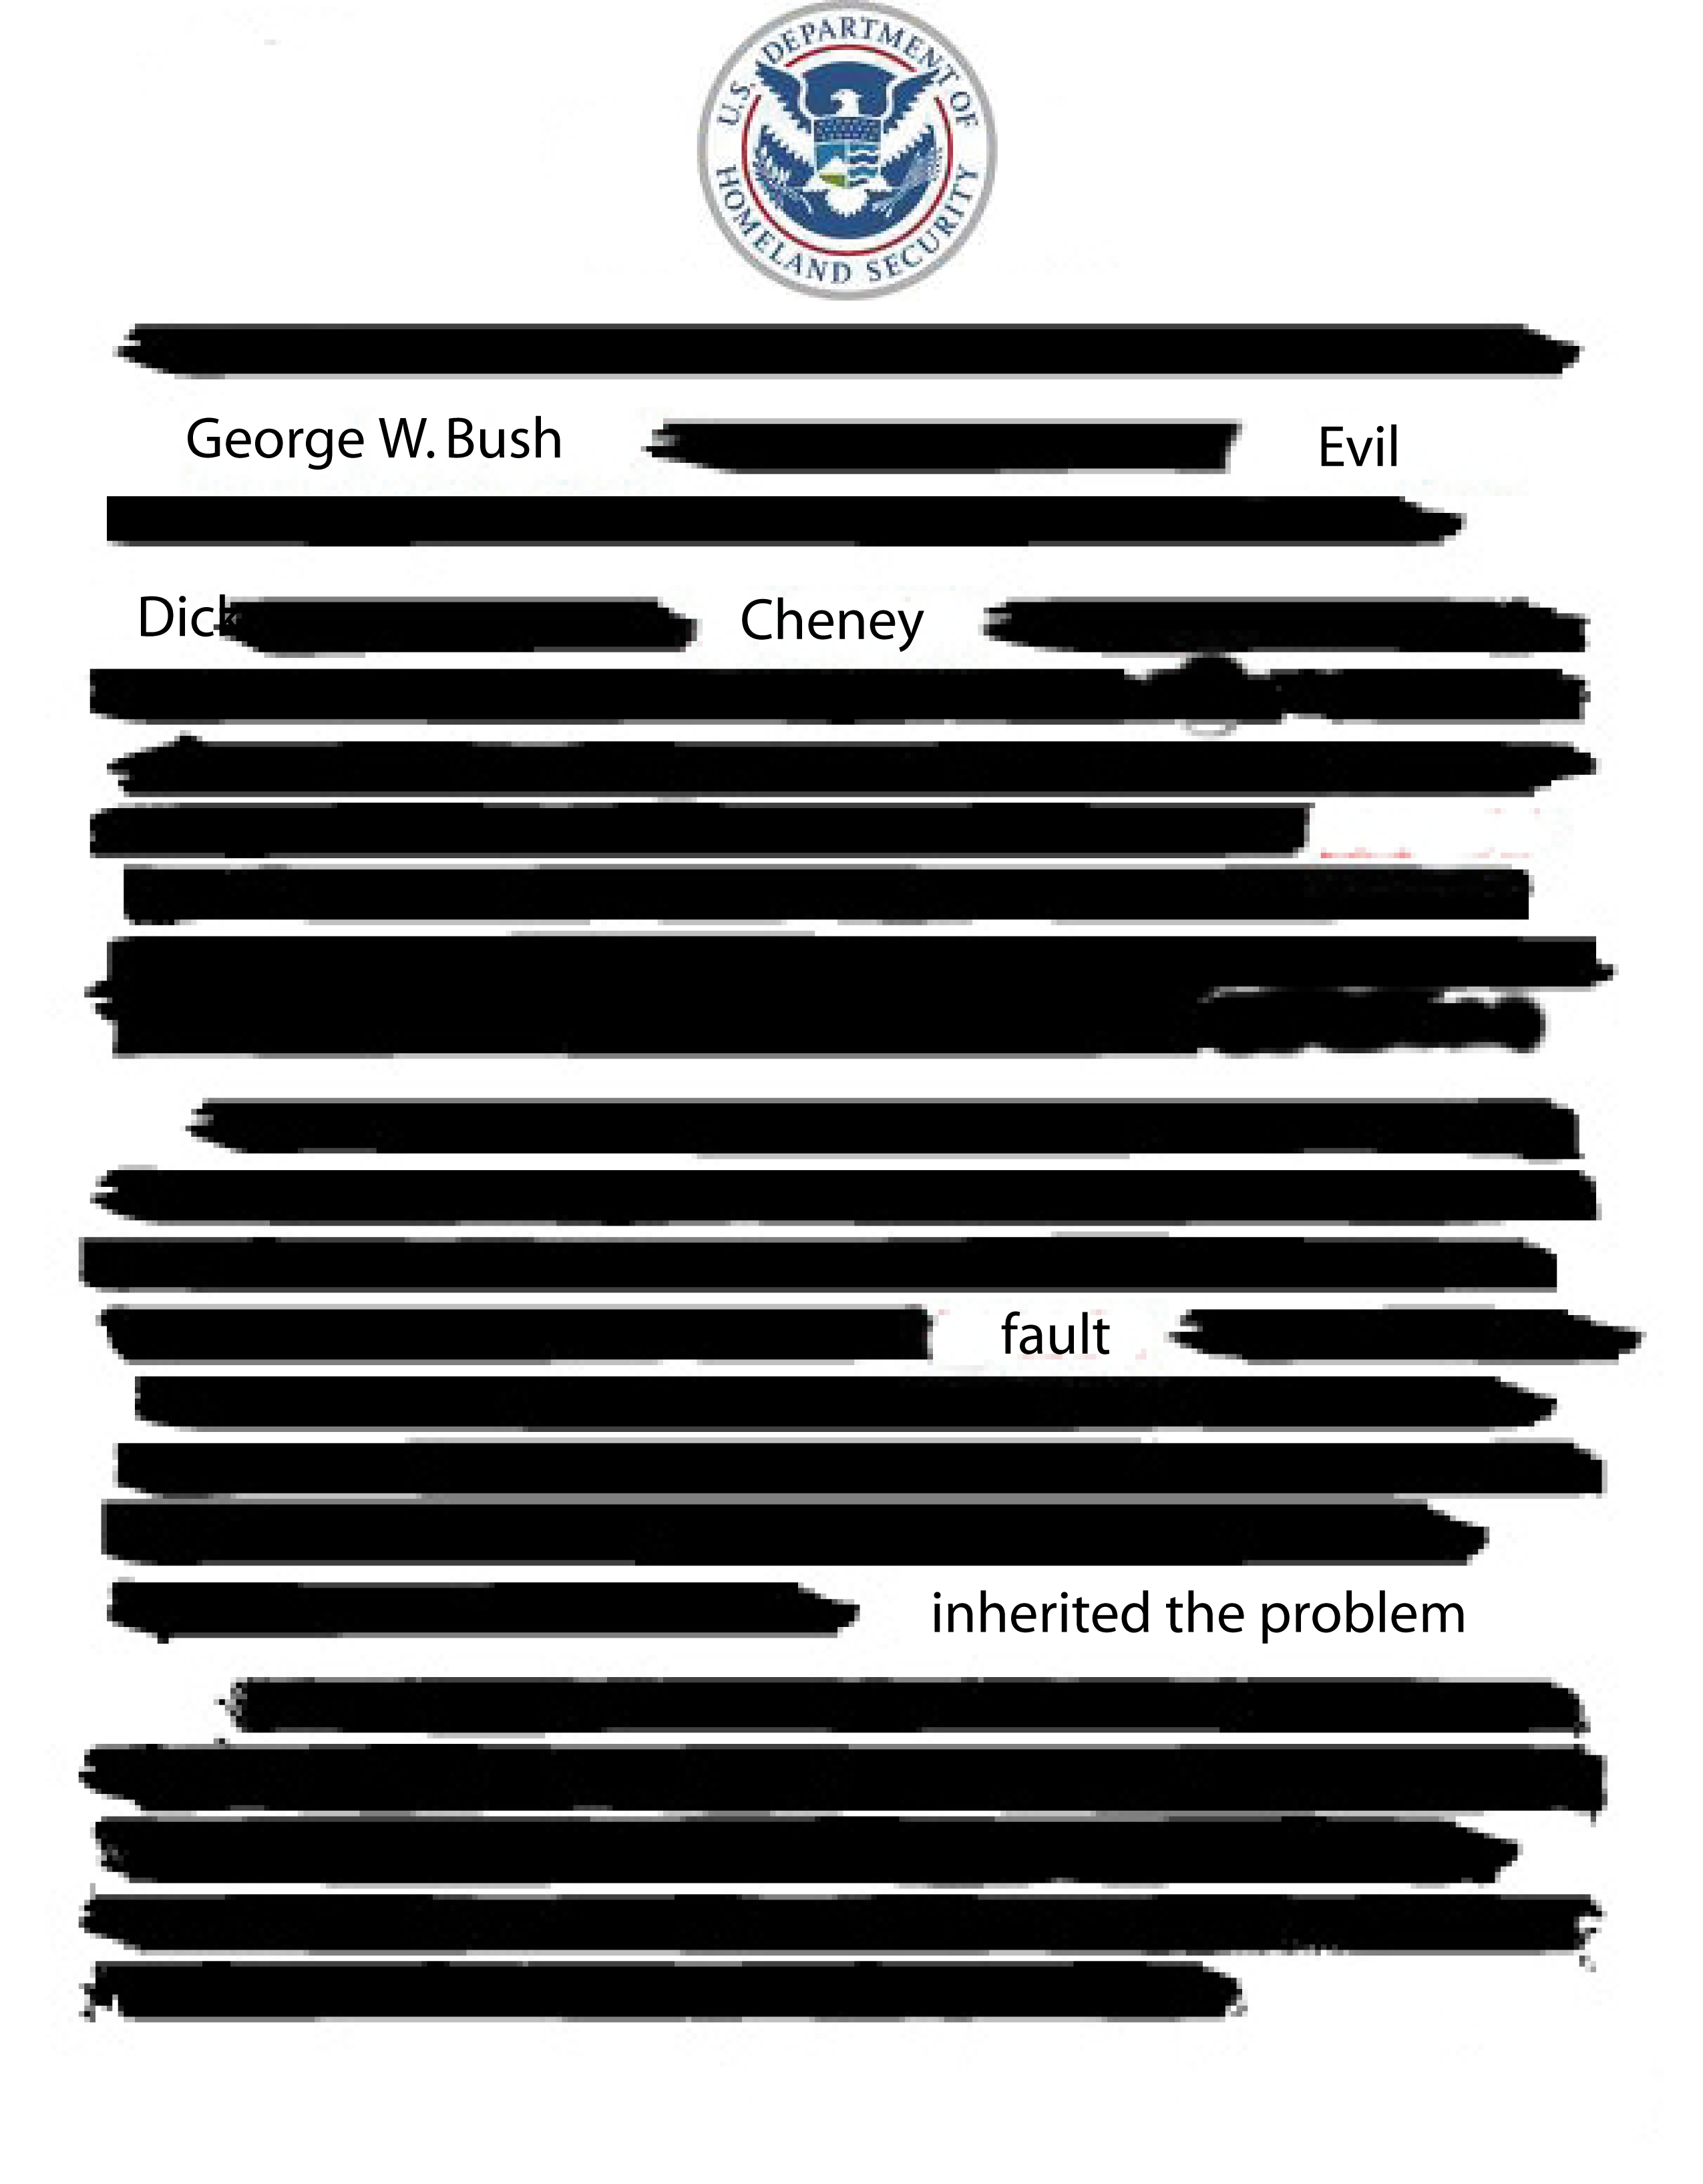 redacted-document.png